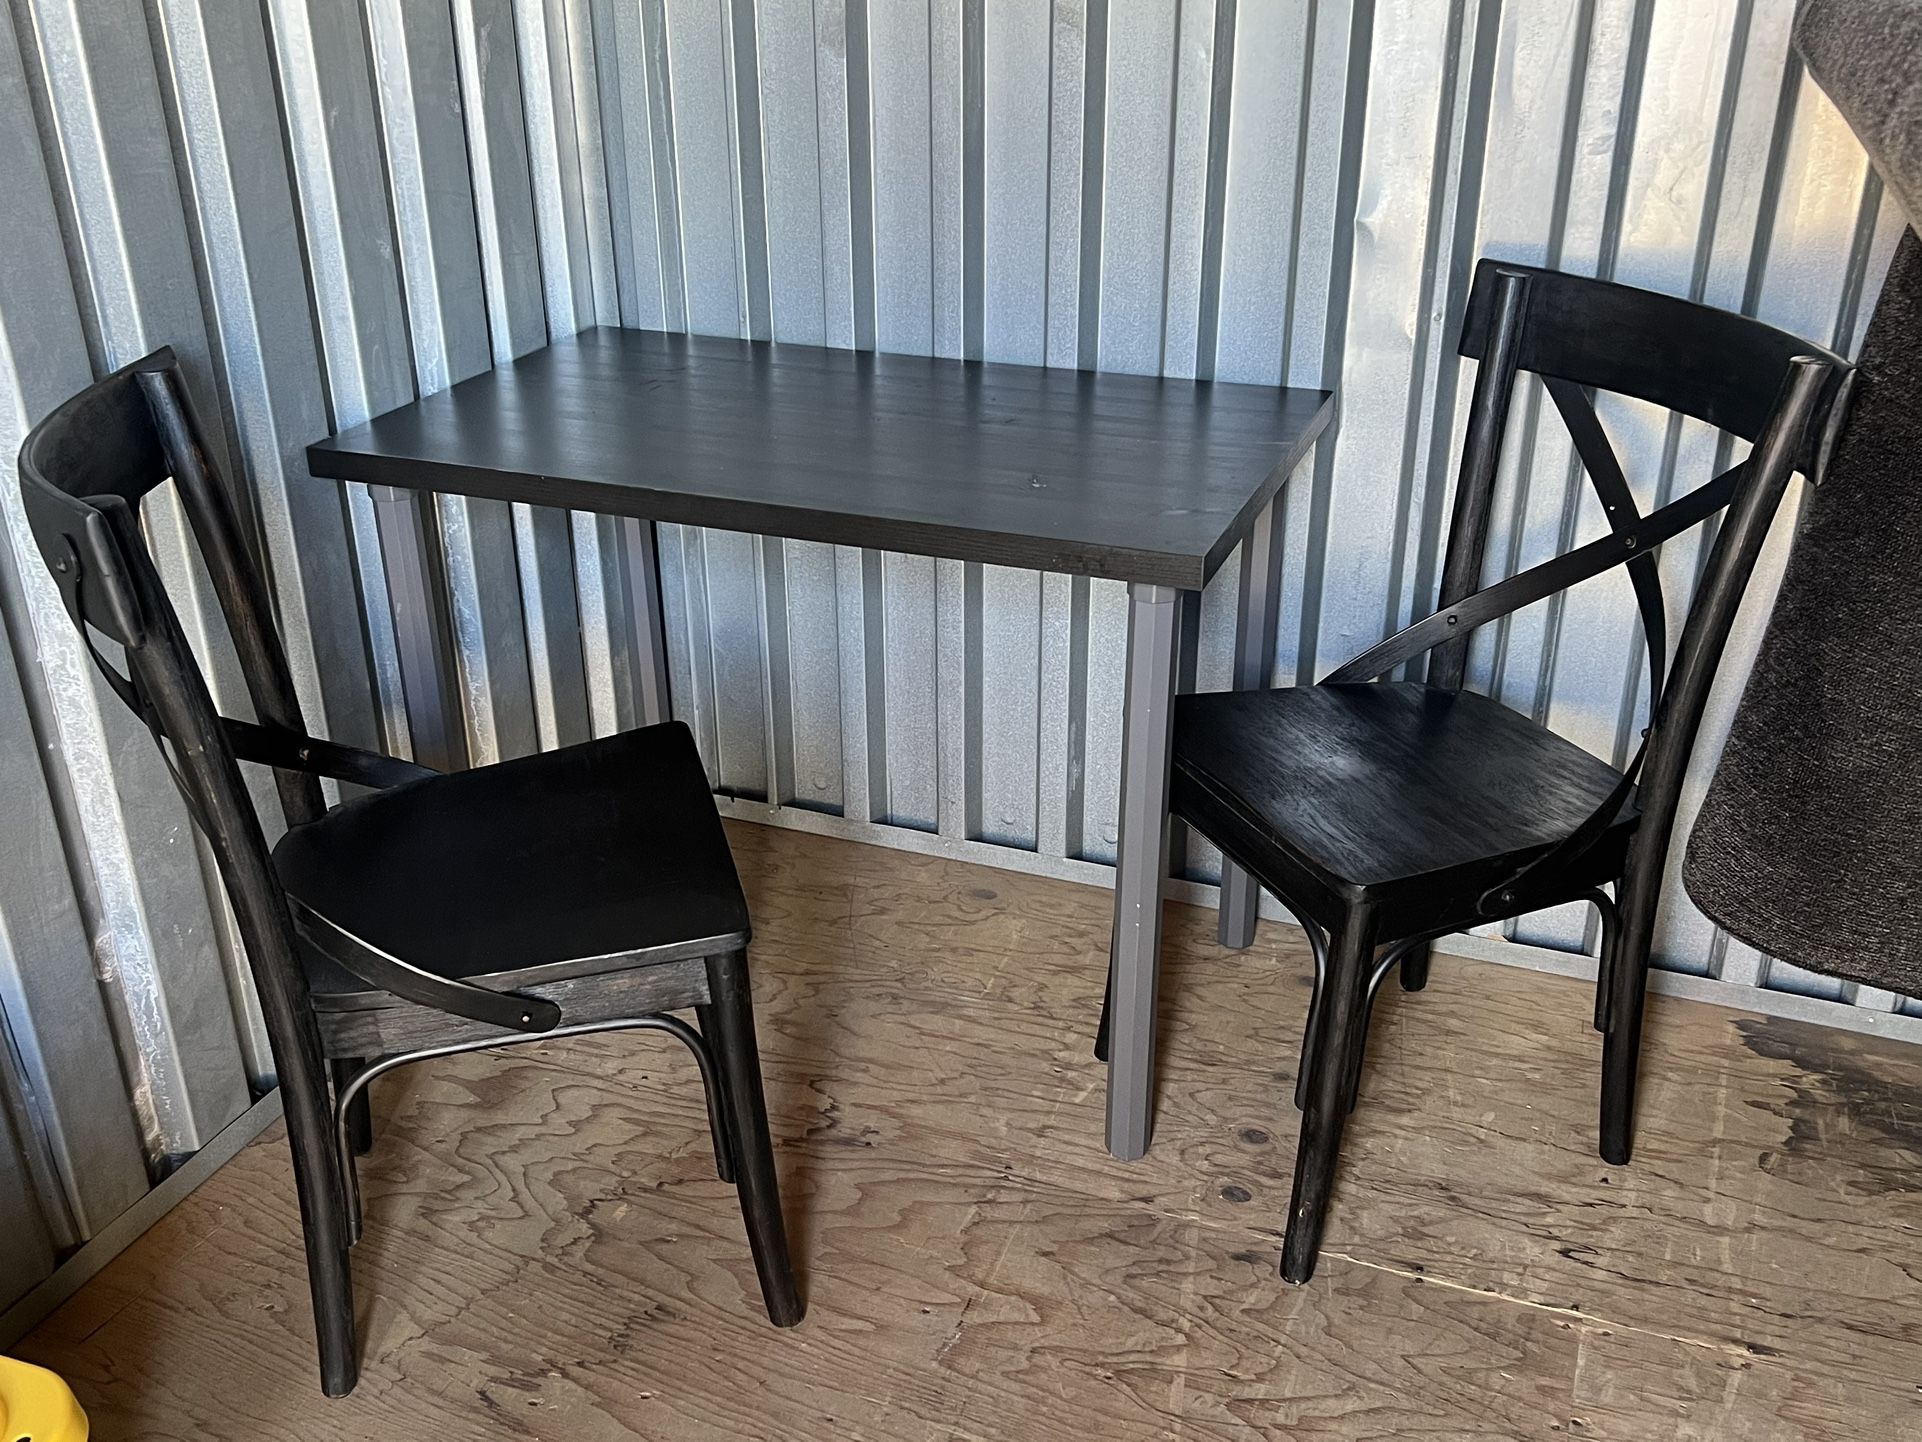 2 Chairs And A Table 